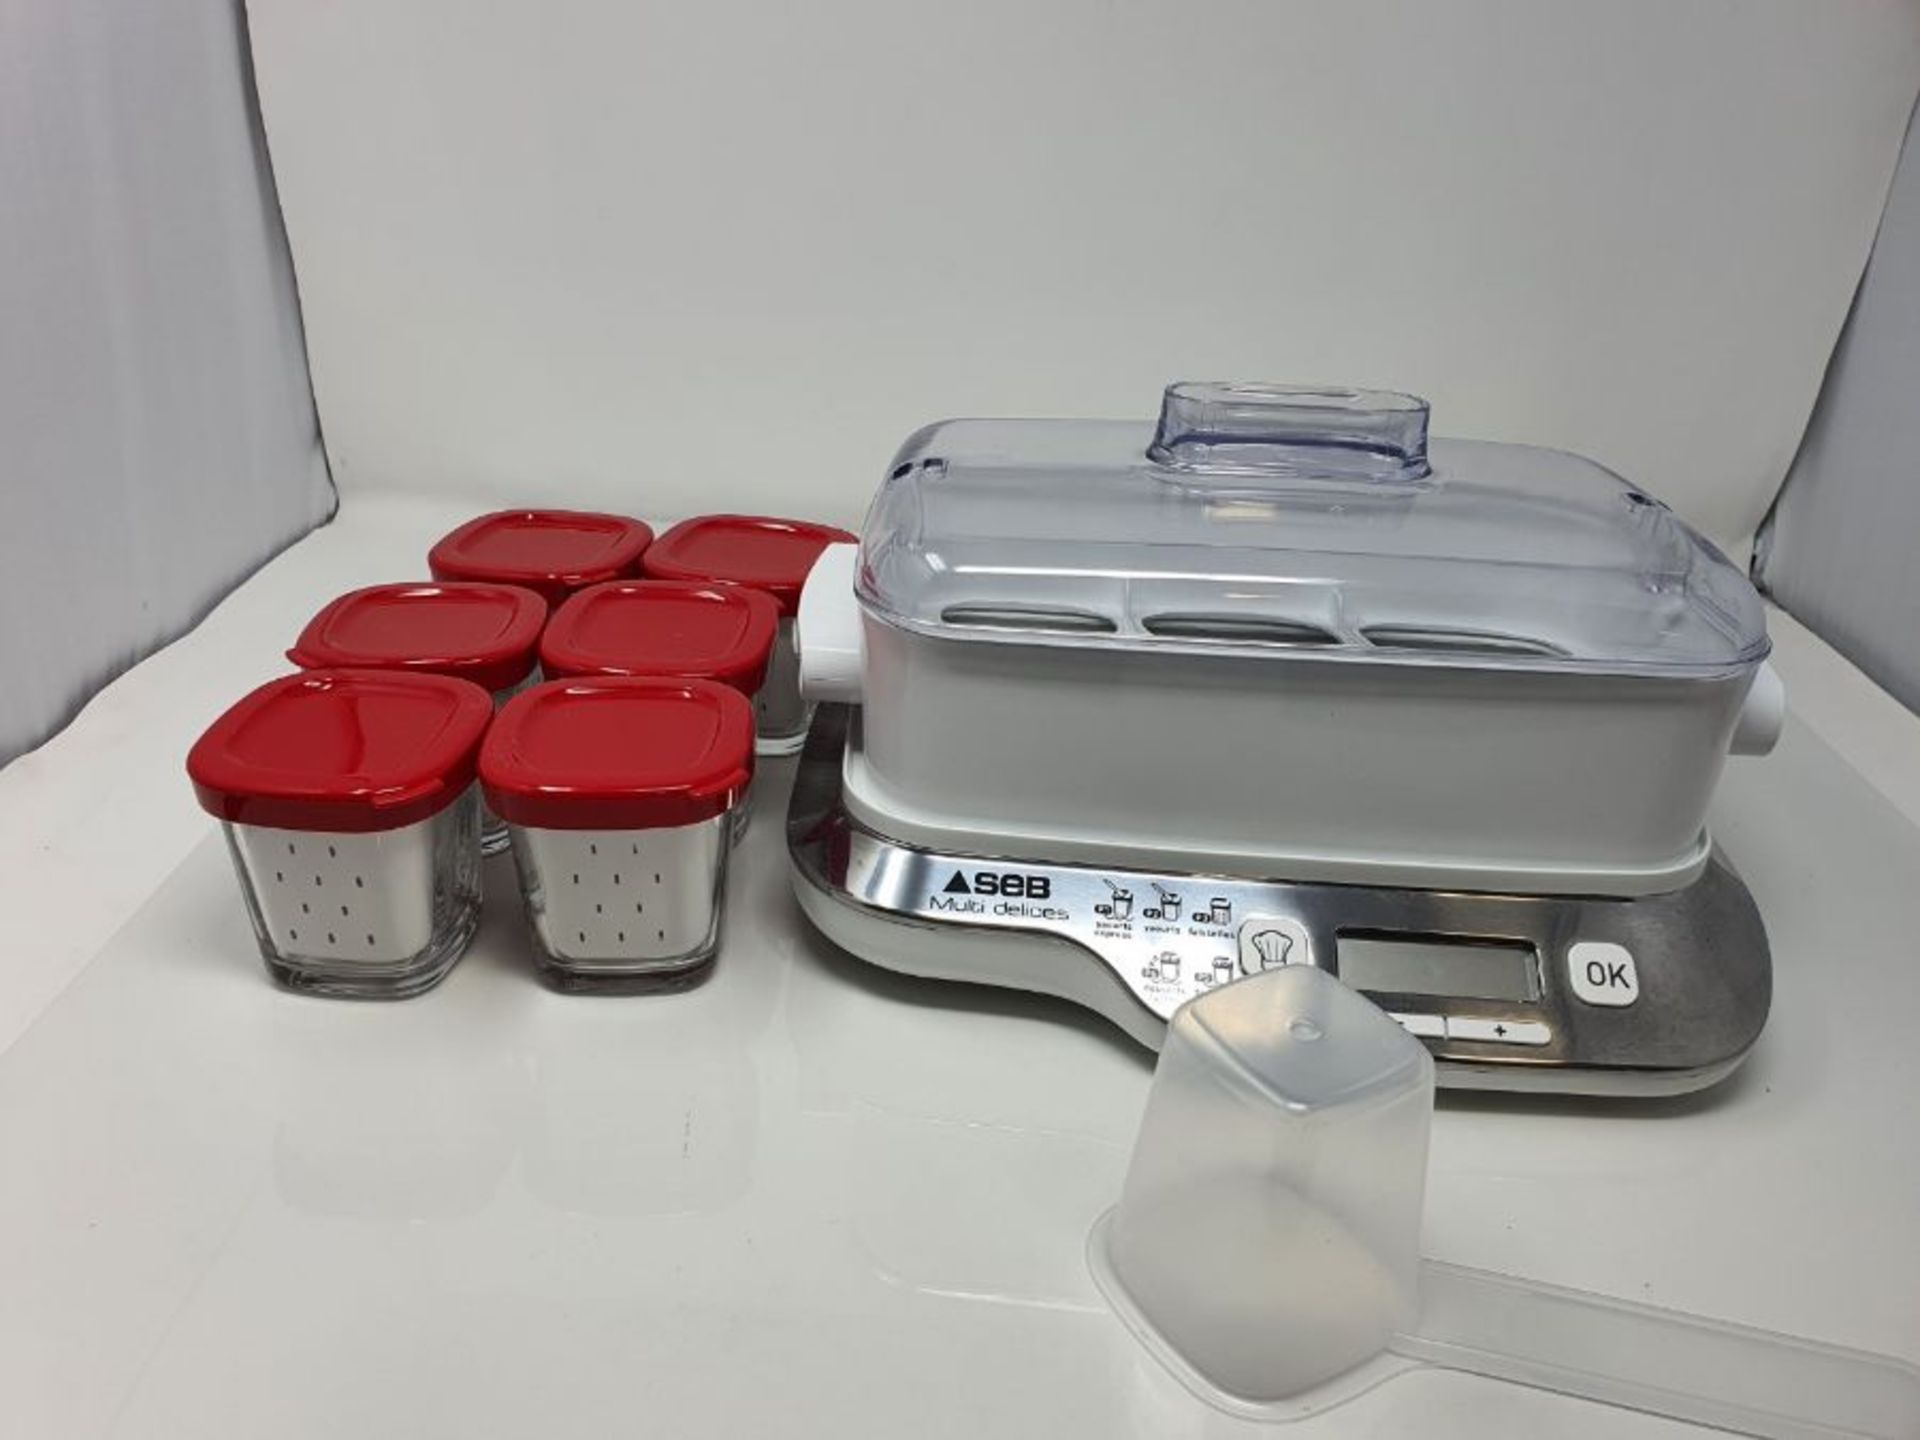 RRP £71.00 Seb Yoghurt Maker Multidelices Express Compact 6 Red Jars, Home Yoghurt, 5 Automatic P - Image 3 of 3